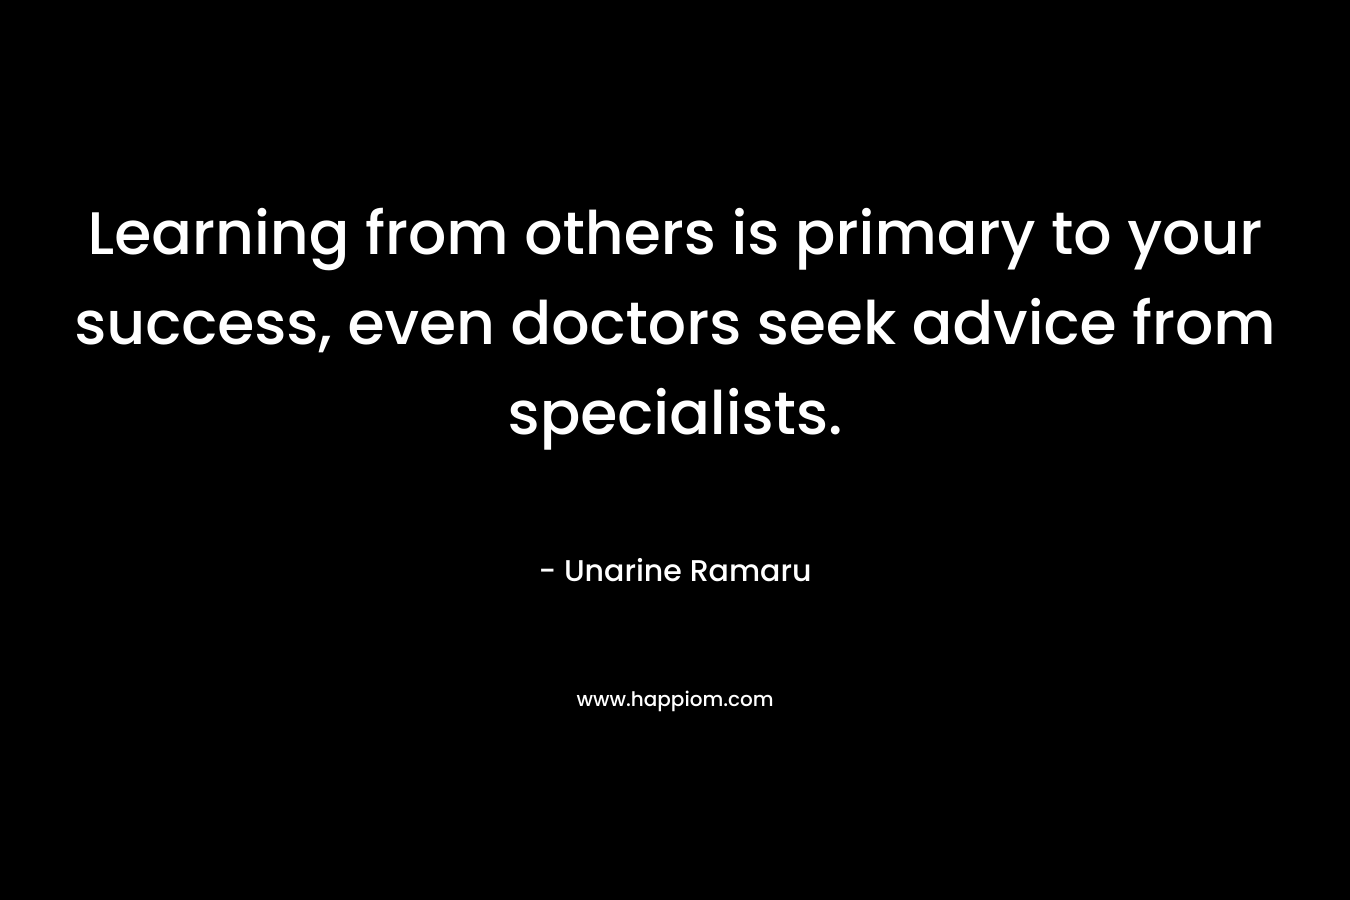 Learning from others is primary to your success, even doctors seek advice from specialists.